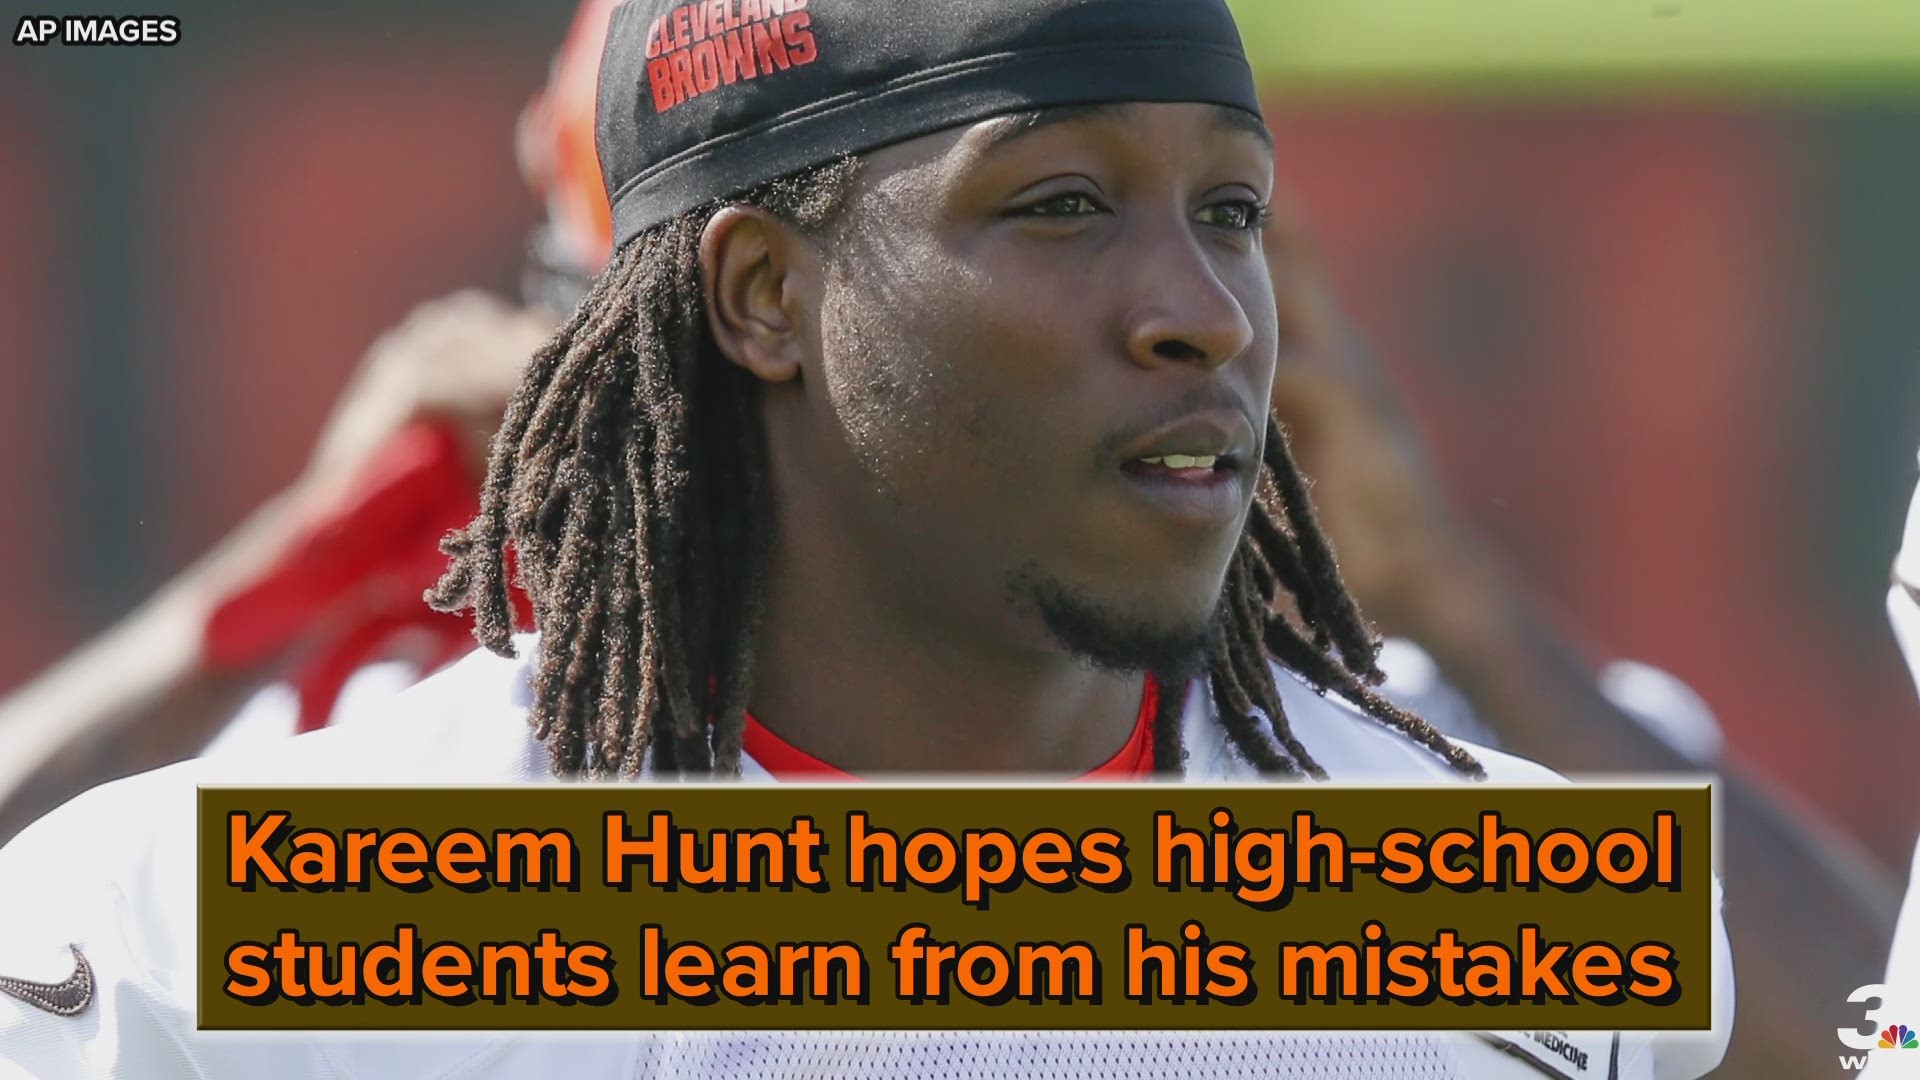 Cleveland Browns running back Kareem Hunt hopes high-school students learn from his mistakes.